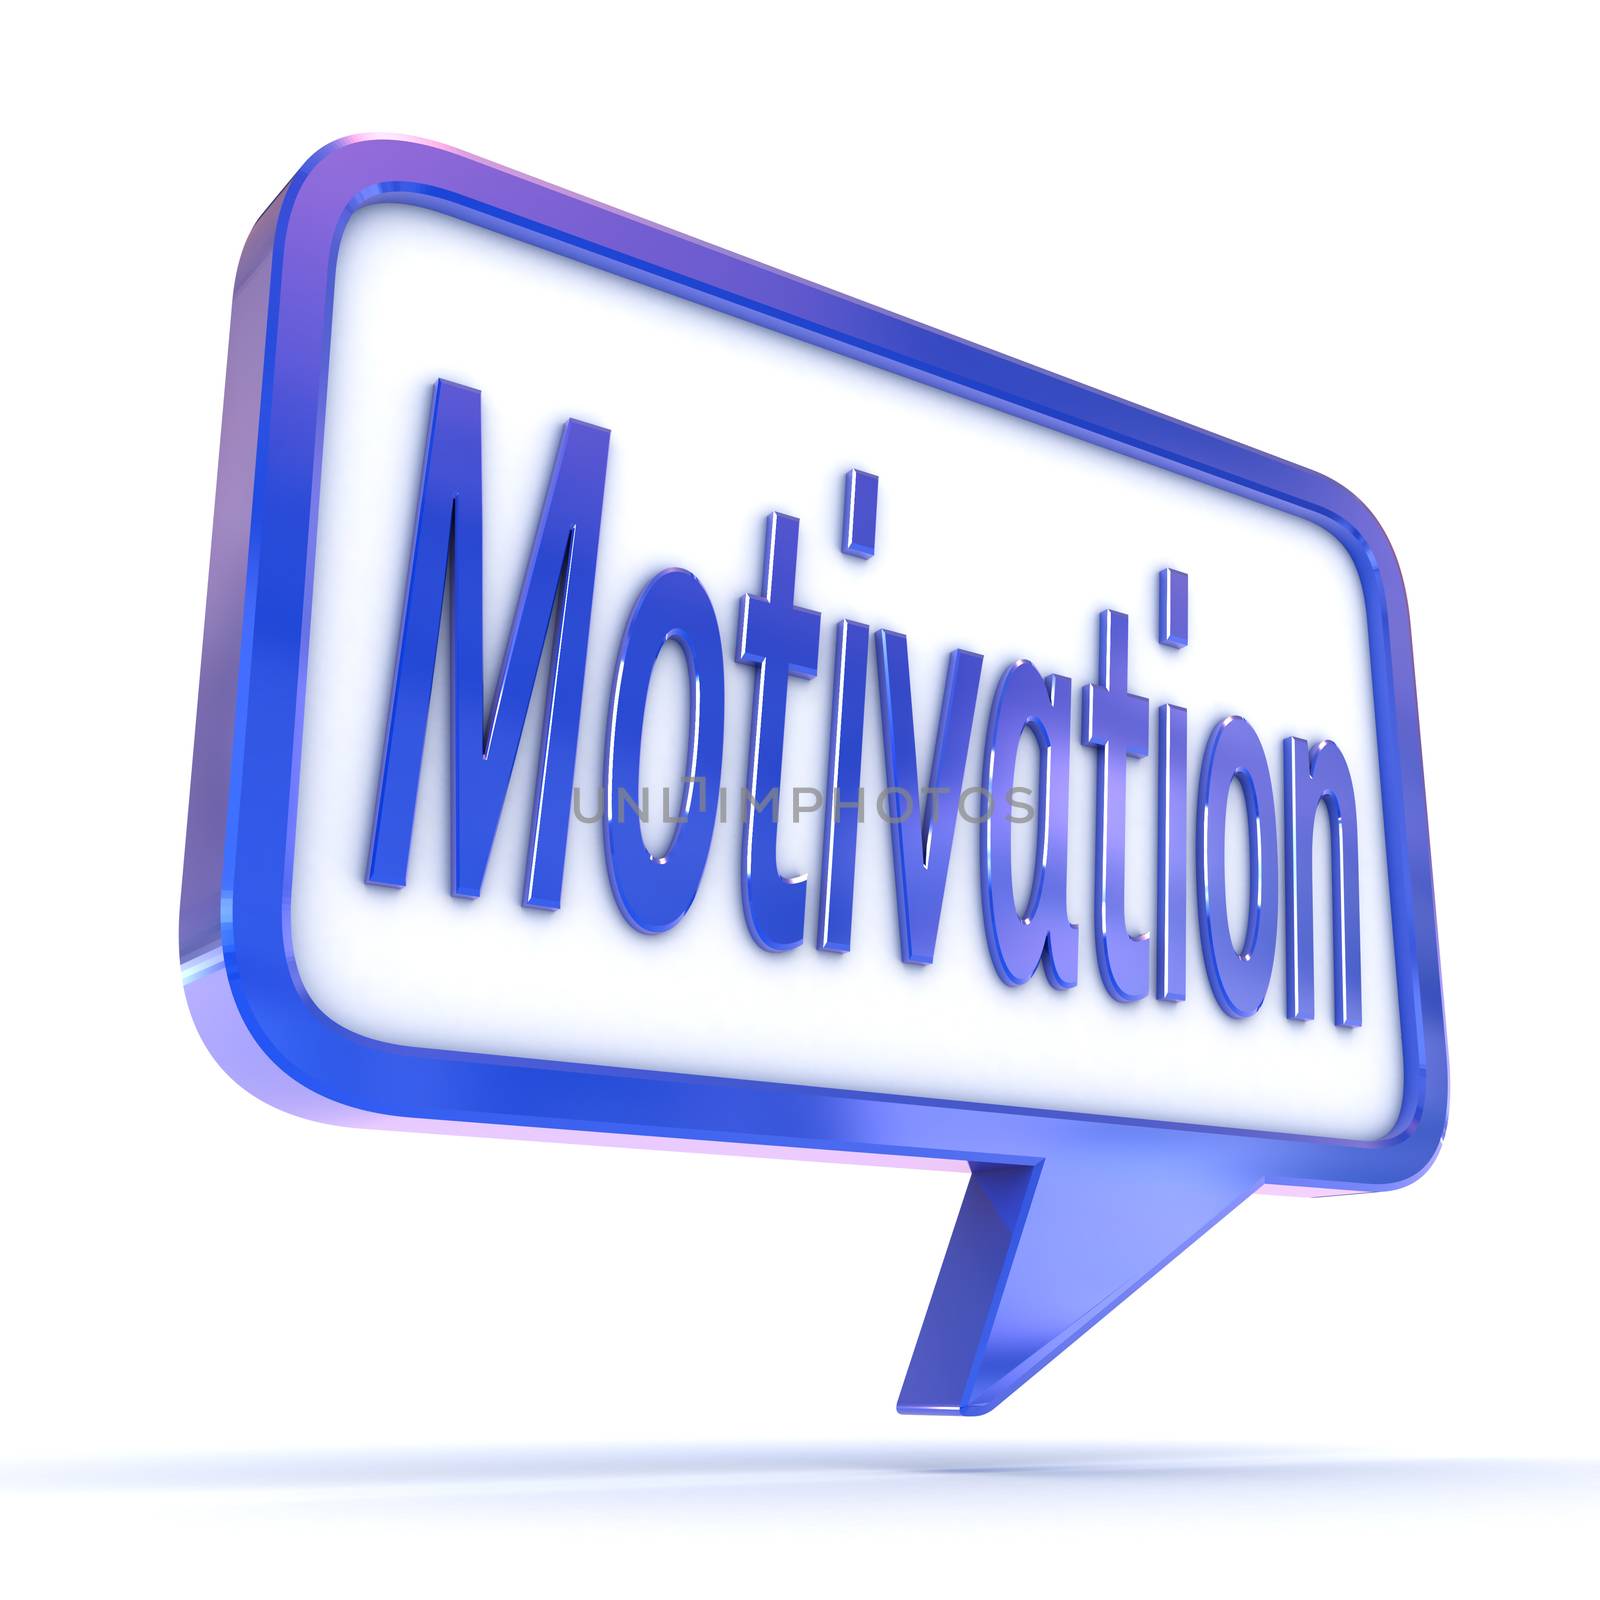 A Colourful 3d Rendered Concept Illustration showing "Motivation" writen in a Speech Bubble